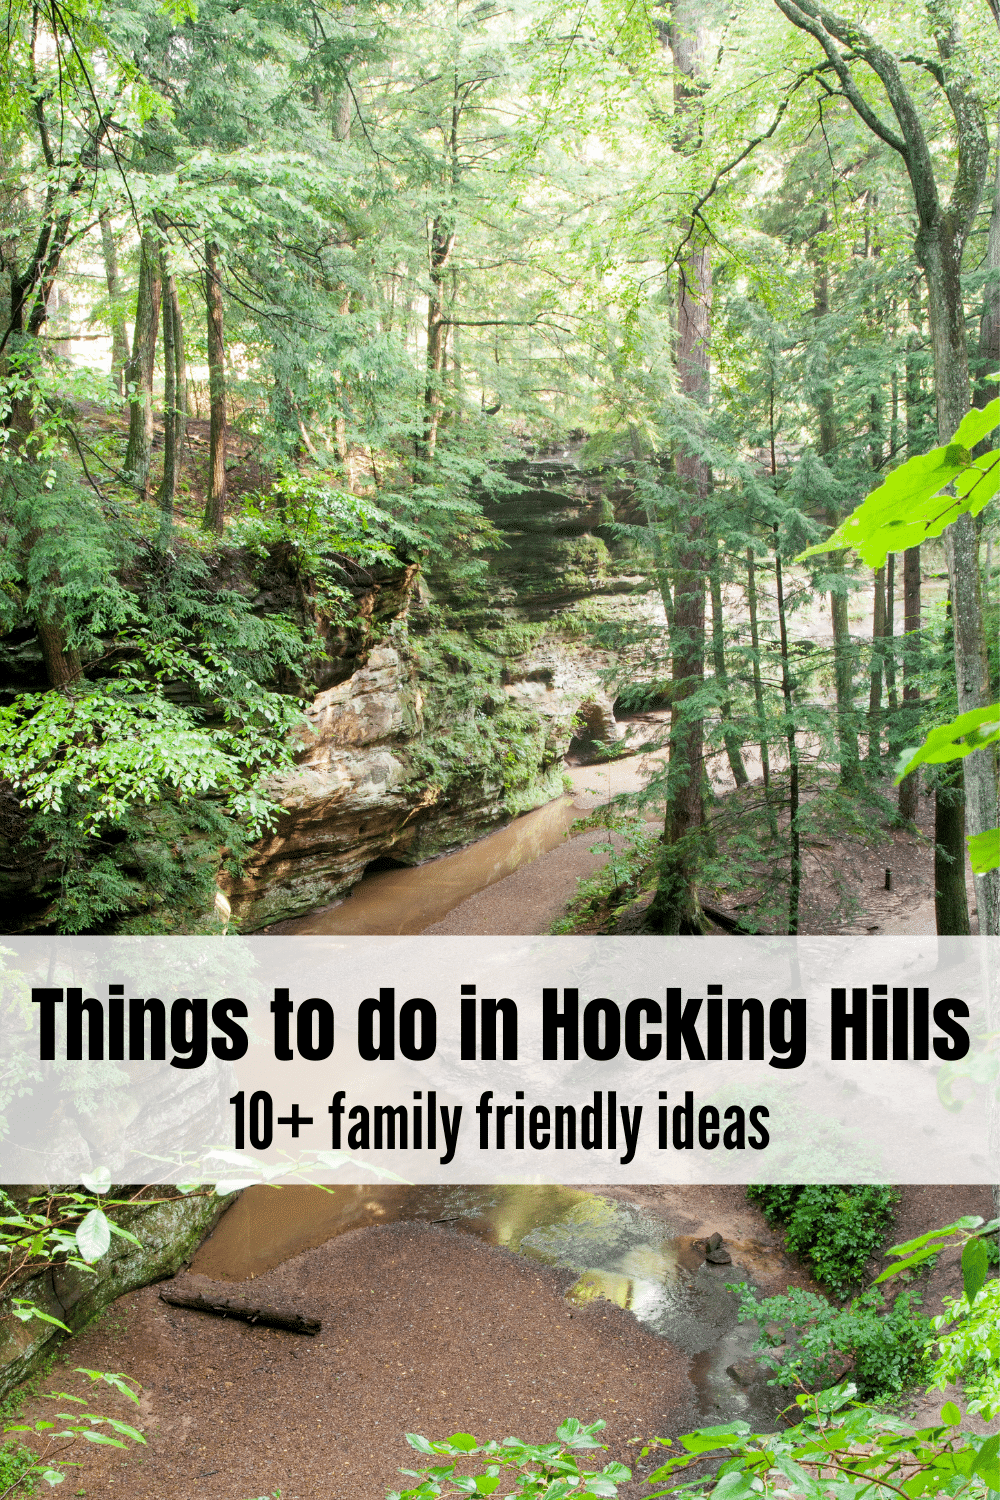 Discover Ohio and our 10 favorite things to visit in Hocking Hills! Just southeast of Columbus, Ohio is a beautiful region in the foothills of the Appalachian mountains called Hocking Hills. #hockinghills #ohio